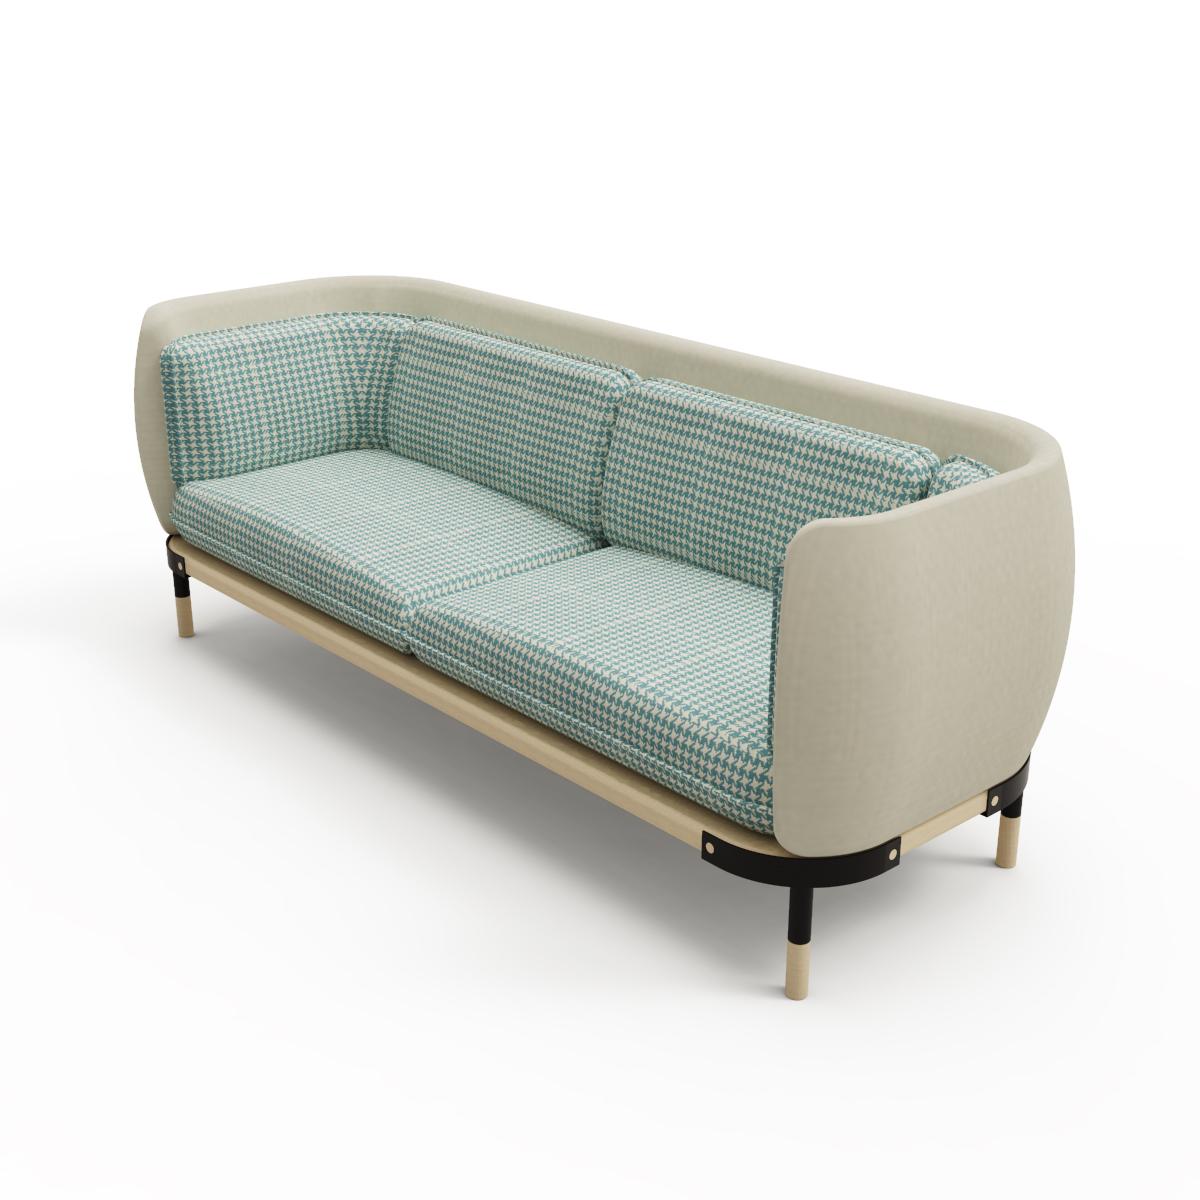 When you add a statement teel sofa like this to your space, decorating is practically one and done! With plush foam cushioning and tall tuxedo-style arms, this piece is the perfect spot to relax after a long day. This item also comes as a